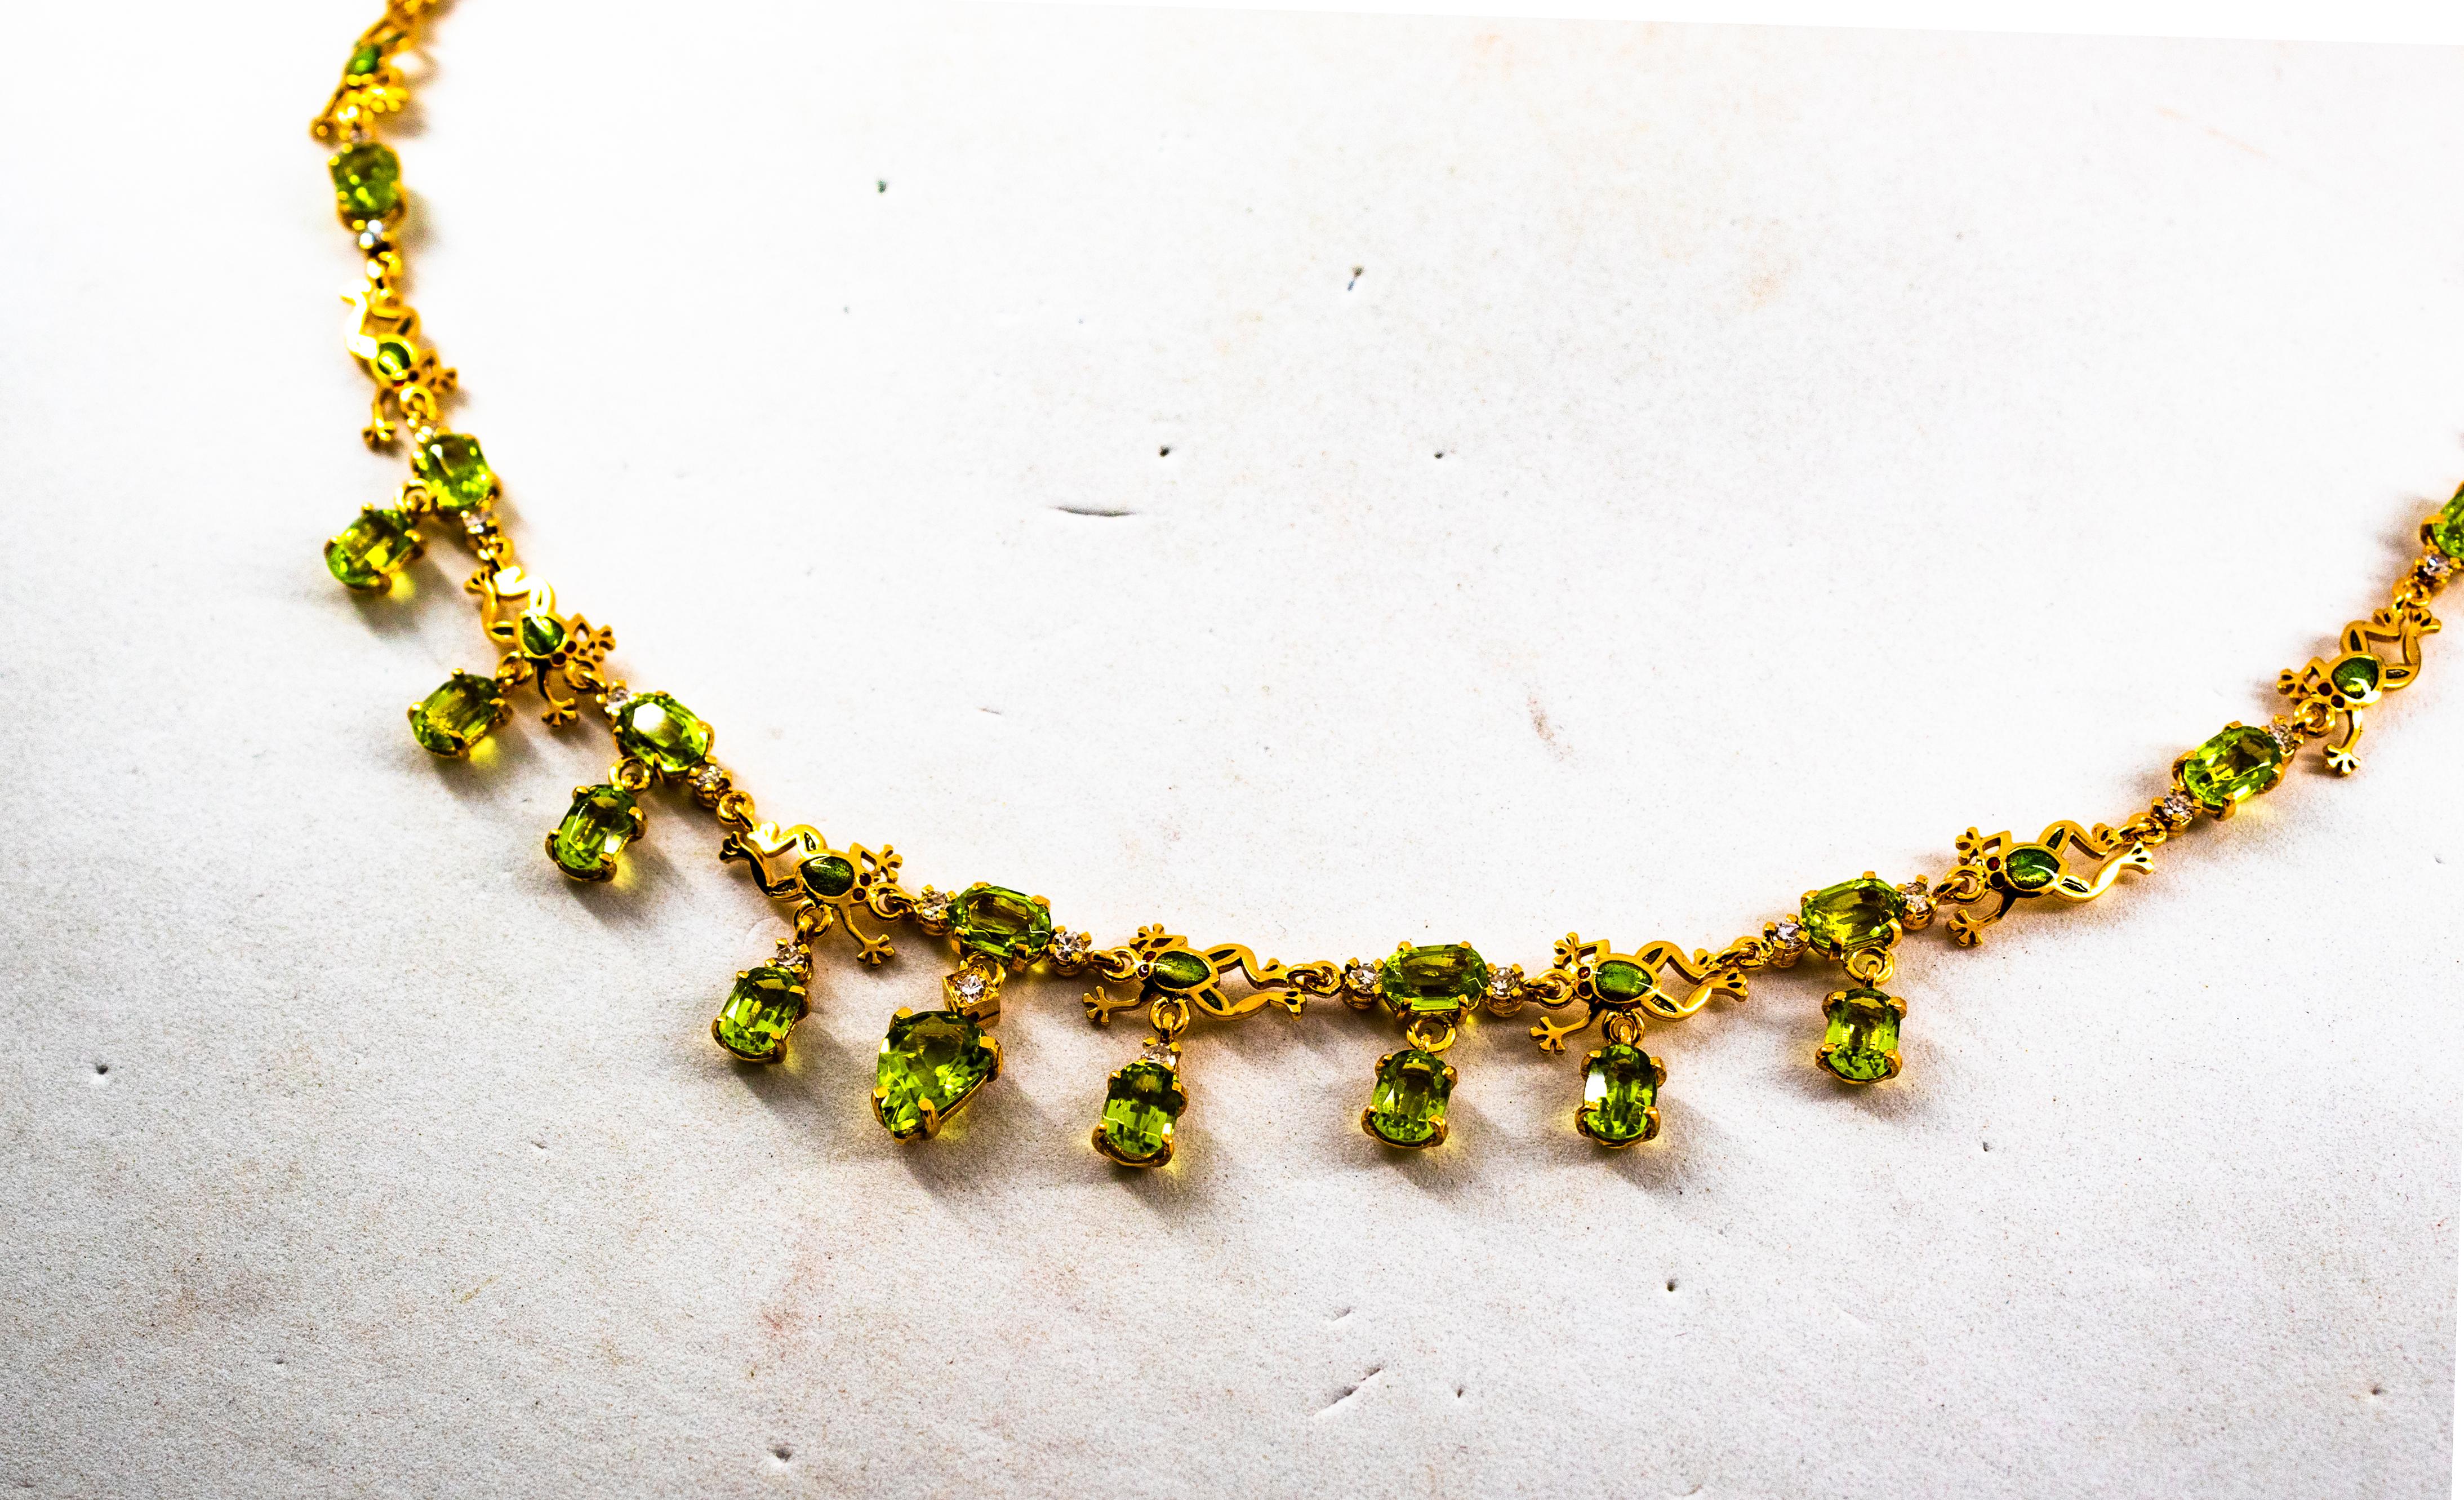 This Necklace is made of 9K Yellow Gold.
This Necklace has 0.59 Carats of White Brilliant Cut Diamonds.
This Necklace has 16.90 Carats of Peridots.
This Necklace has Green Enamel.

This Necklace is inspired by Art Deco.

This Necklace is available